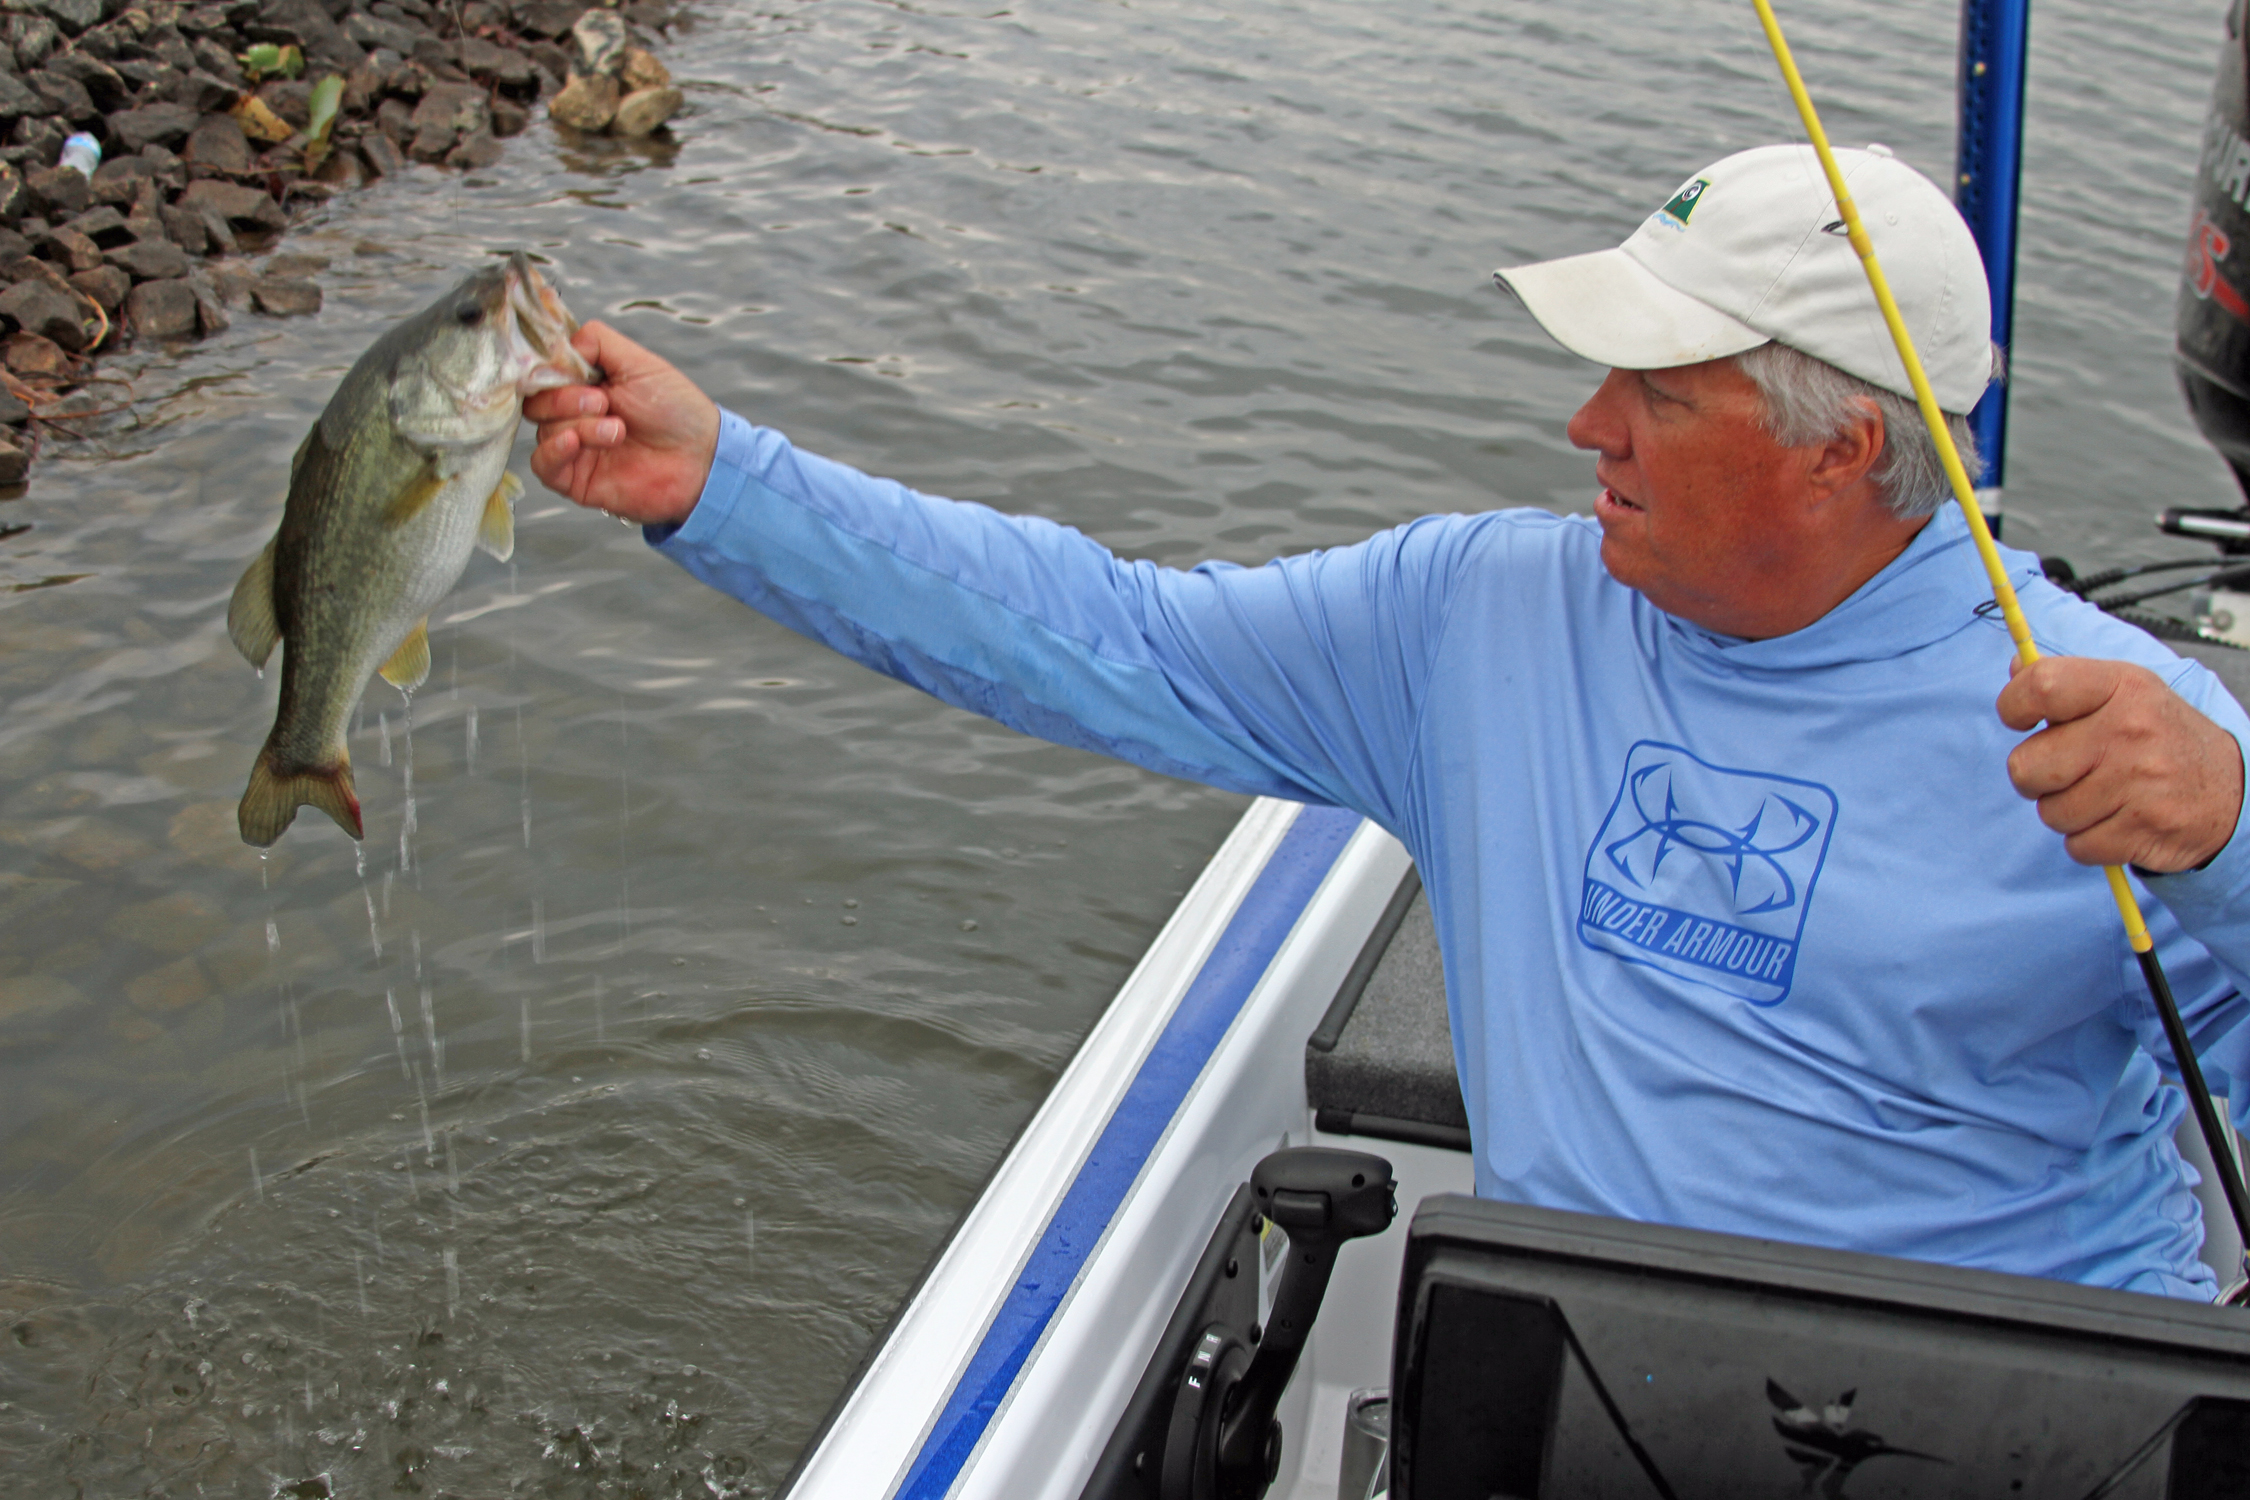 Lake Eufaula back in action for anglers after year-long down cycle 